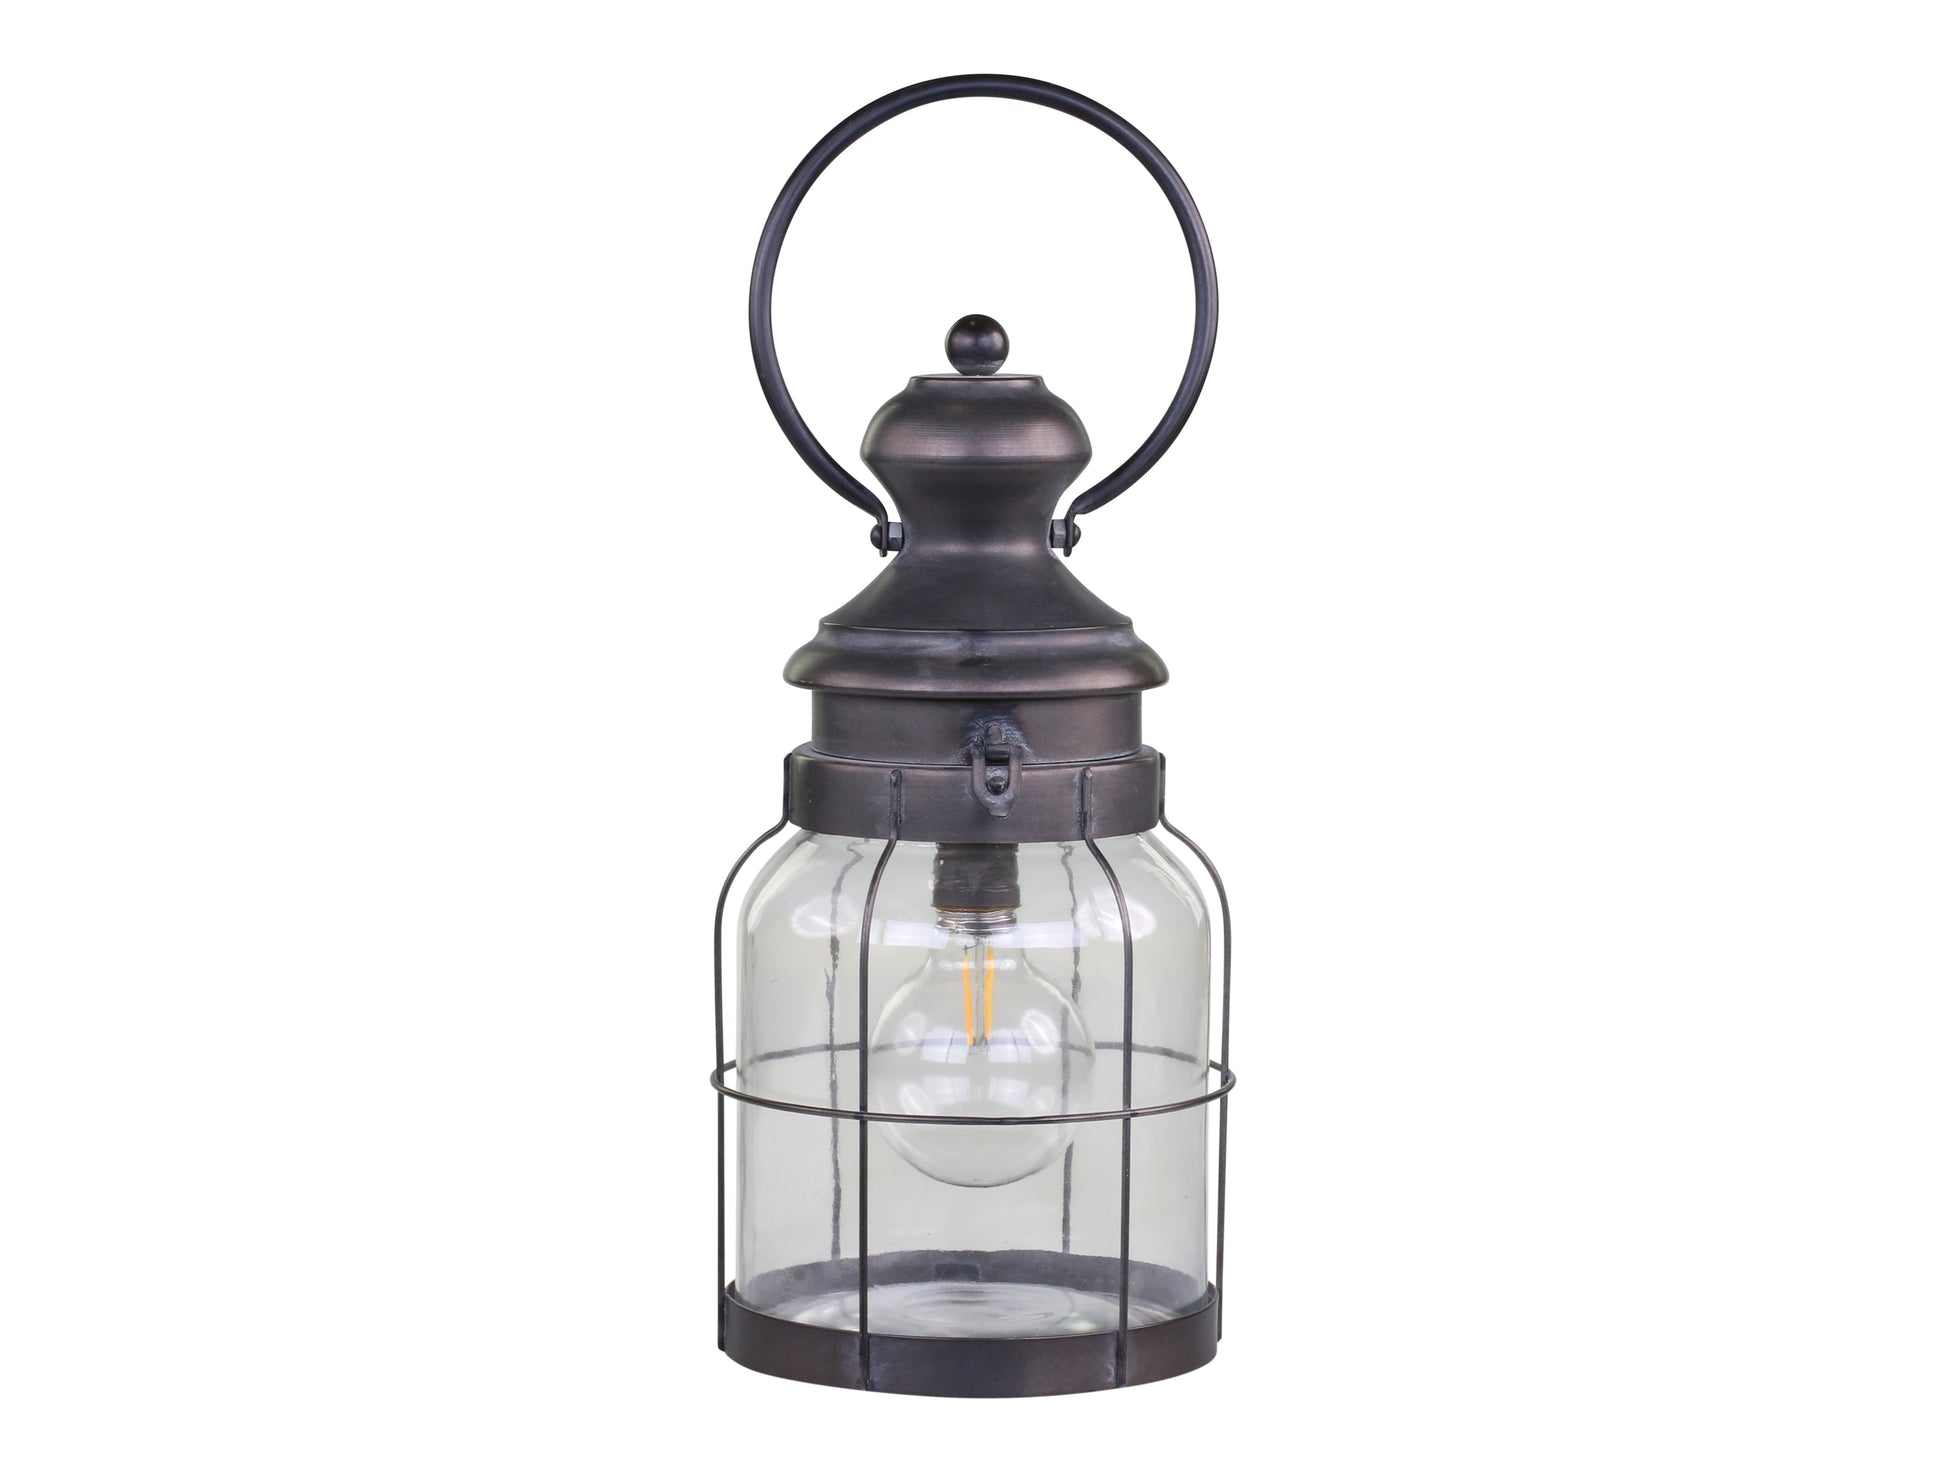 Never get caught if power goes out. These lanterns are perfect and safe for walking around a dark house. They make excellent night lights as well just adding ambiance to any room. Once turned on they will automatically shut off after 8 hours  Material: Zinc and glass Socket: E12 Watt: 0,1 can use up to 7  Battery: 2 pcs. AA Timer: 8 hours on/16 hours off  Dimensions: H36.5/D16.5 cm antique coal